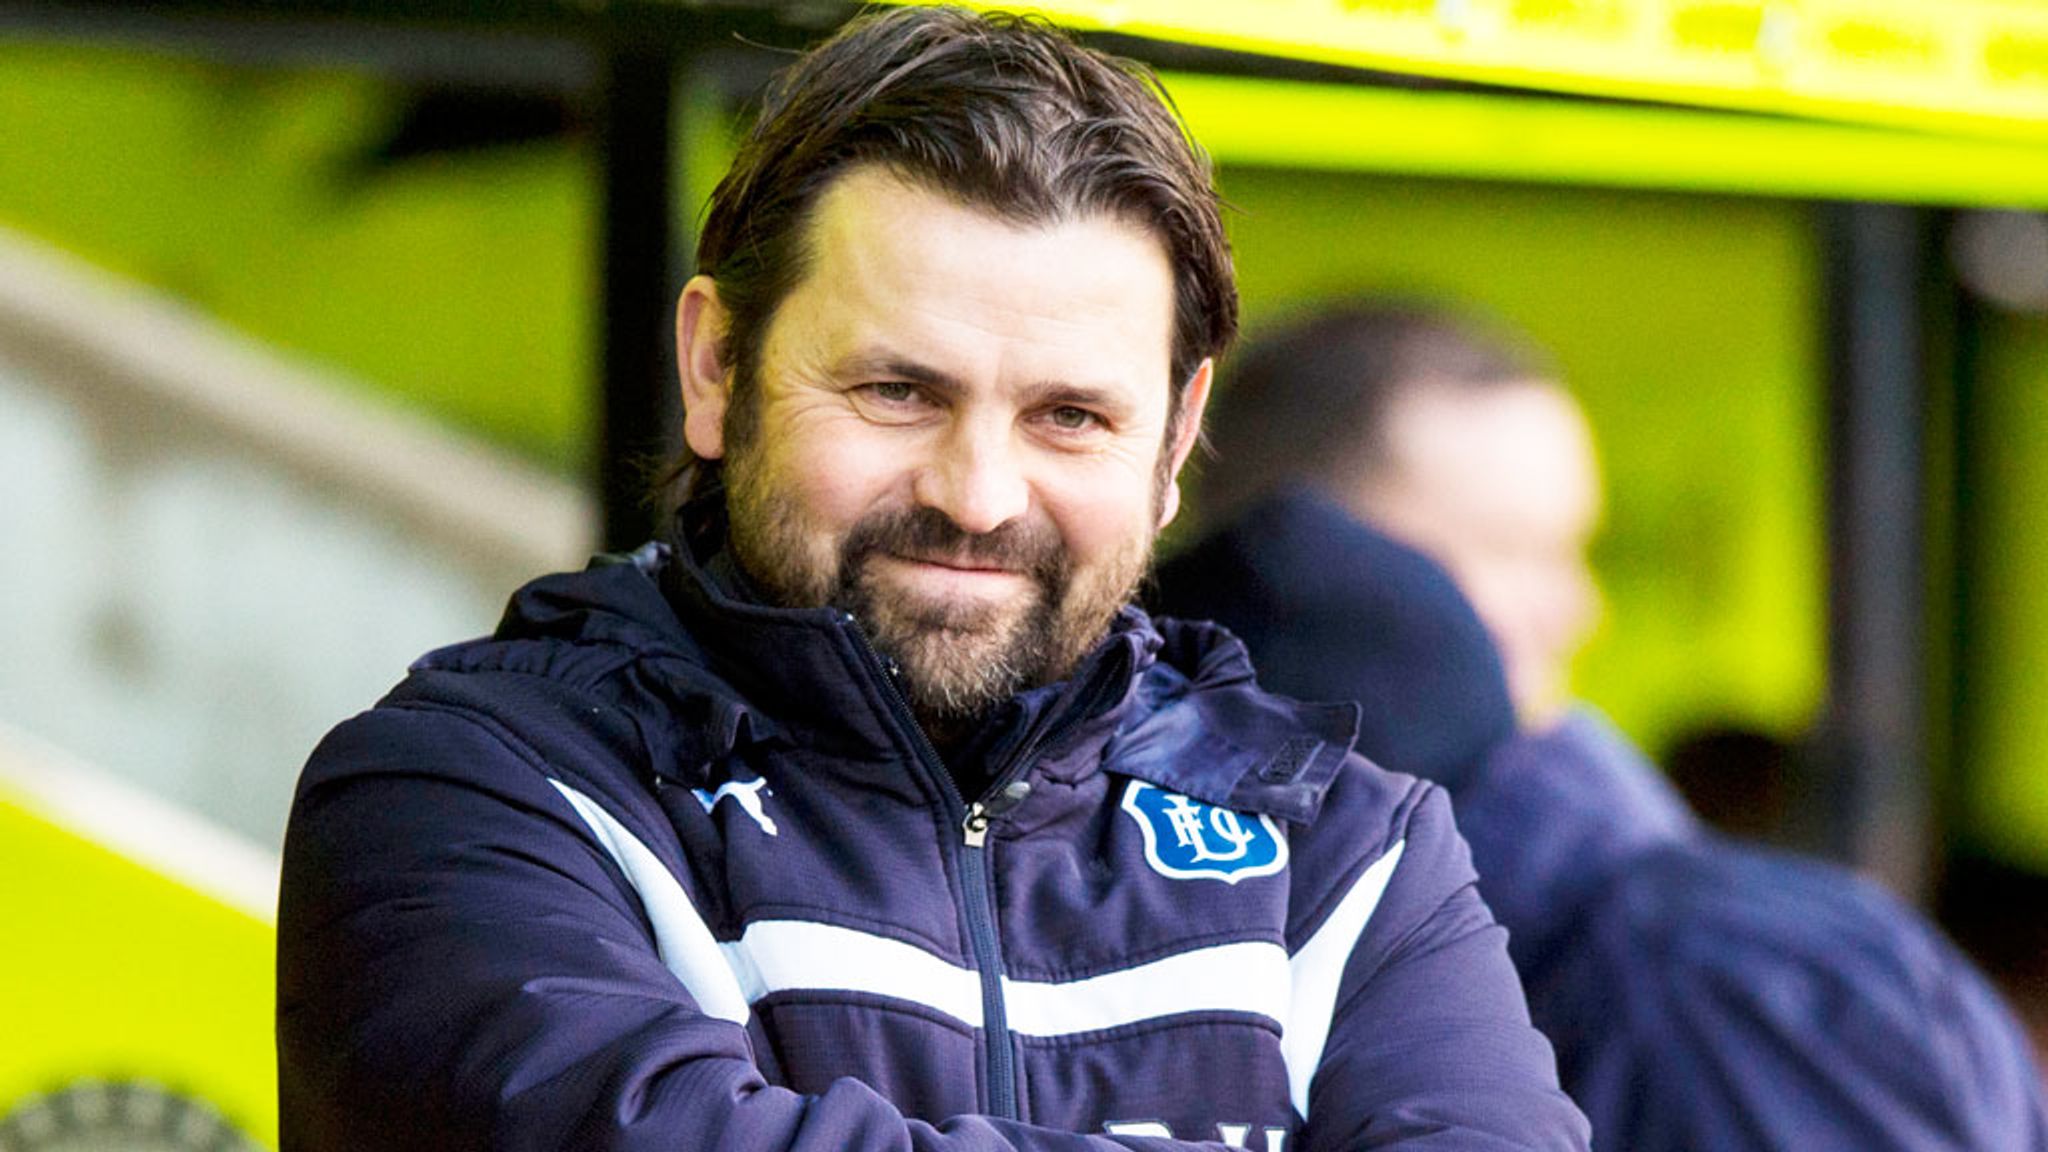 Paul Hartley wants Dundee to move up the Scottish Premiership | Football News | Sky Sports